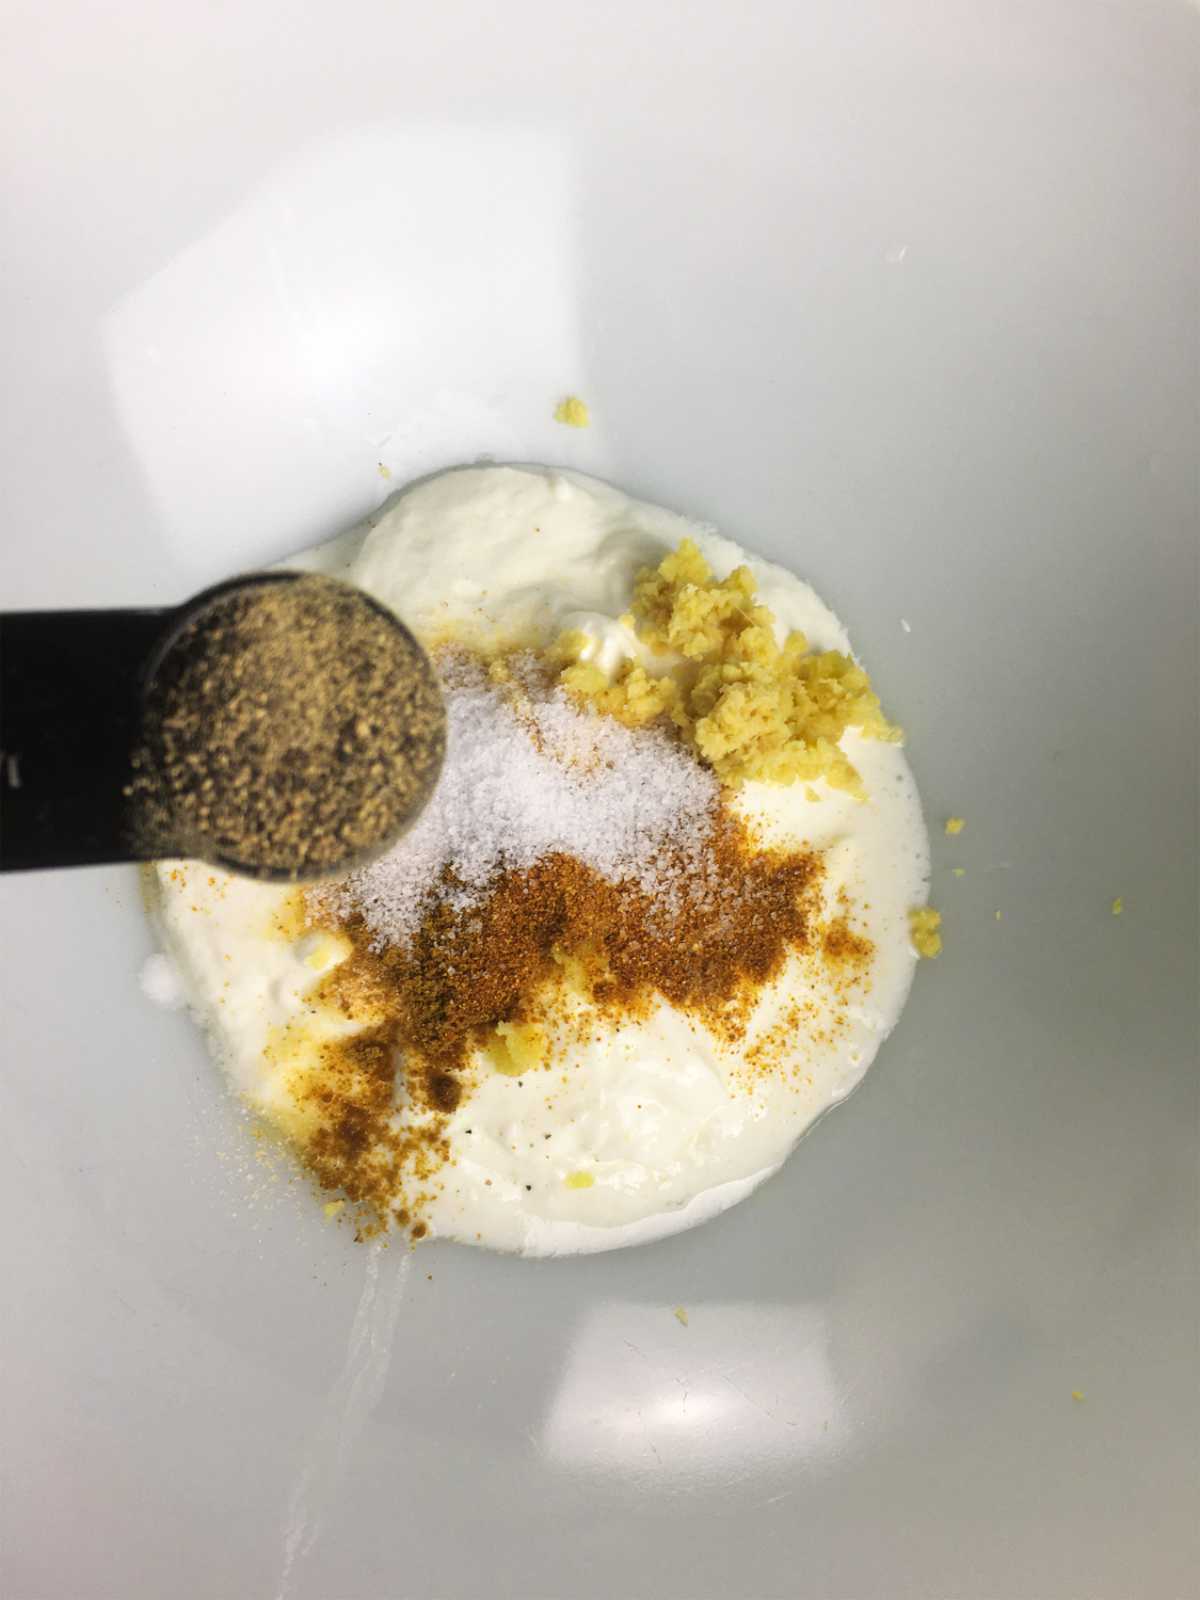 spices added to yogurt in a white glass bowl.